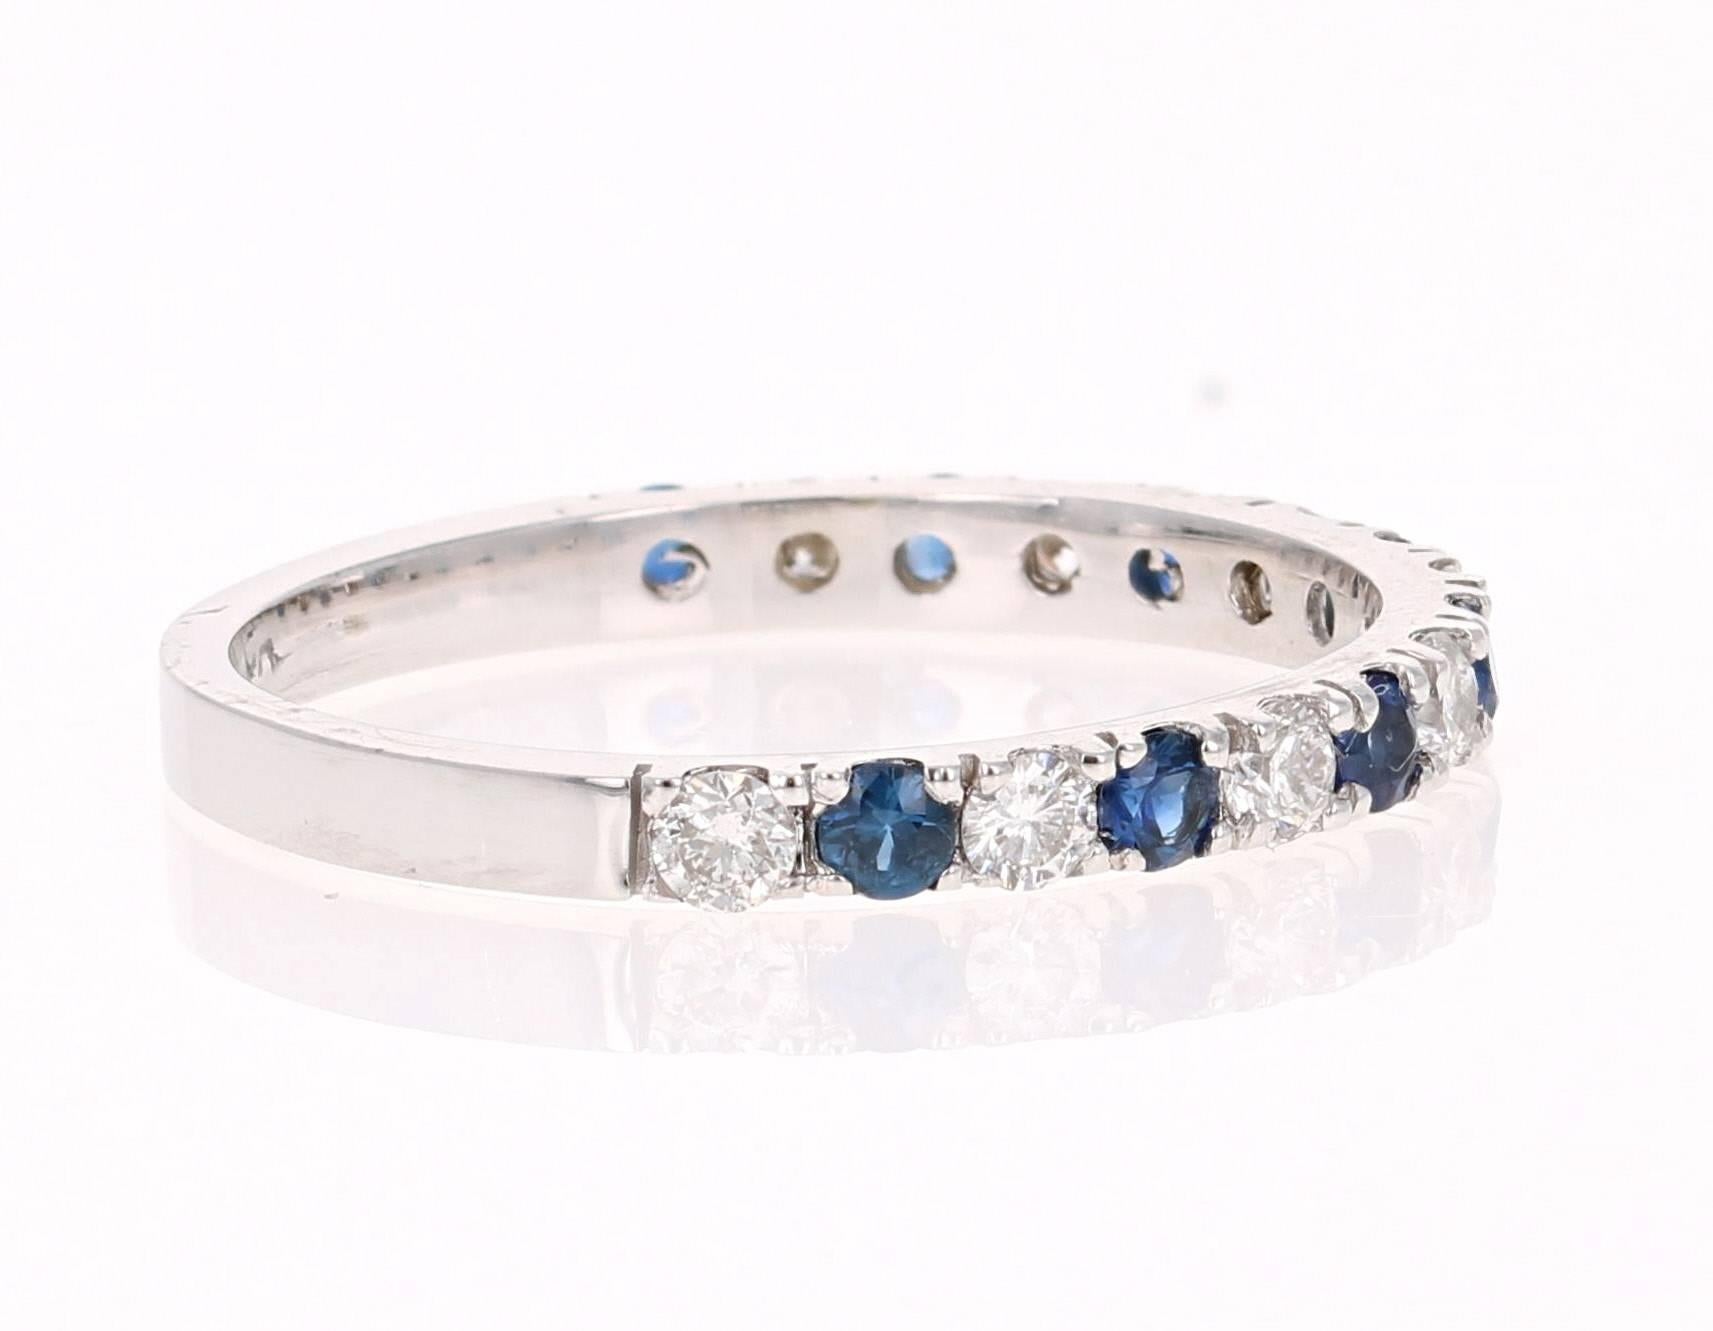 Cute and dainty Sapphire and Diamond band that is sure to be a great addition to anyone's accessory collection.   There are 8 Round Cut Sapphires that weigh 0.41 carats and 8 Round Cut Diamonds that weigh 0.32 carats (Clarity:  SI2, Color: F).  The